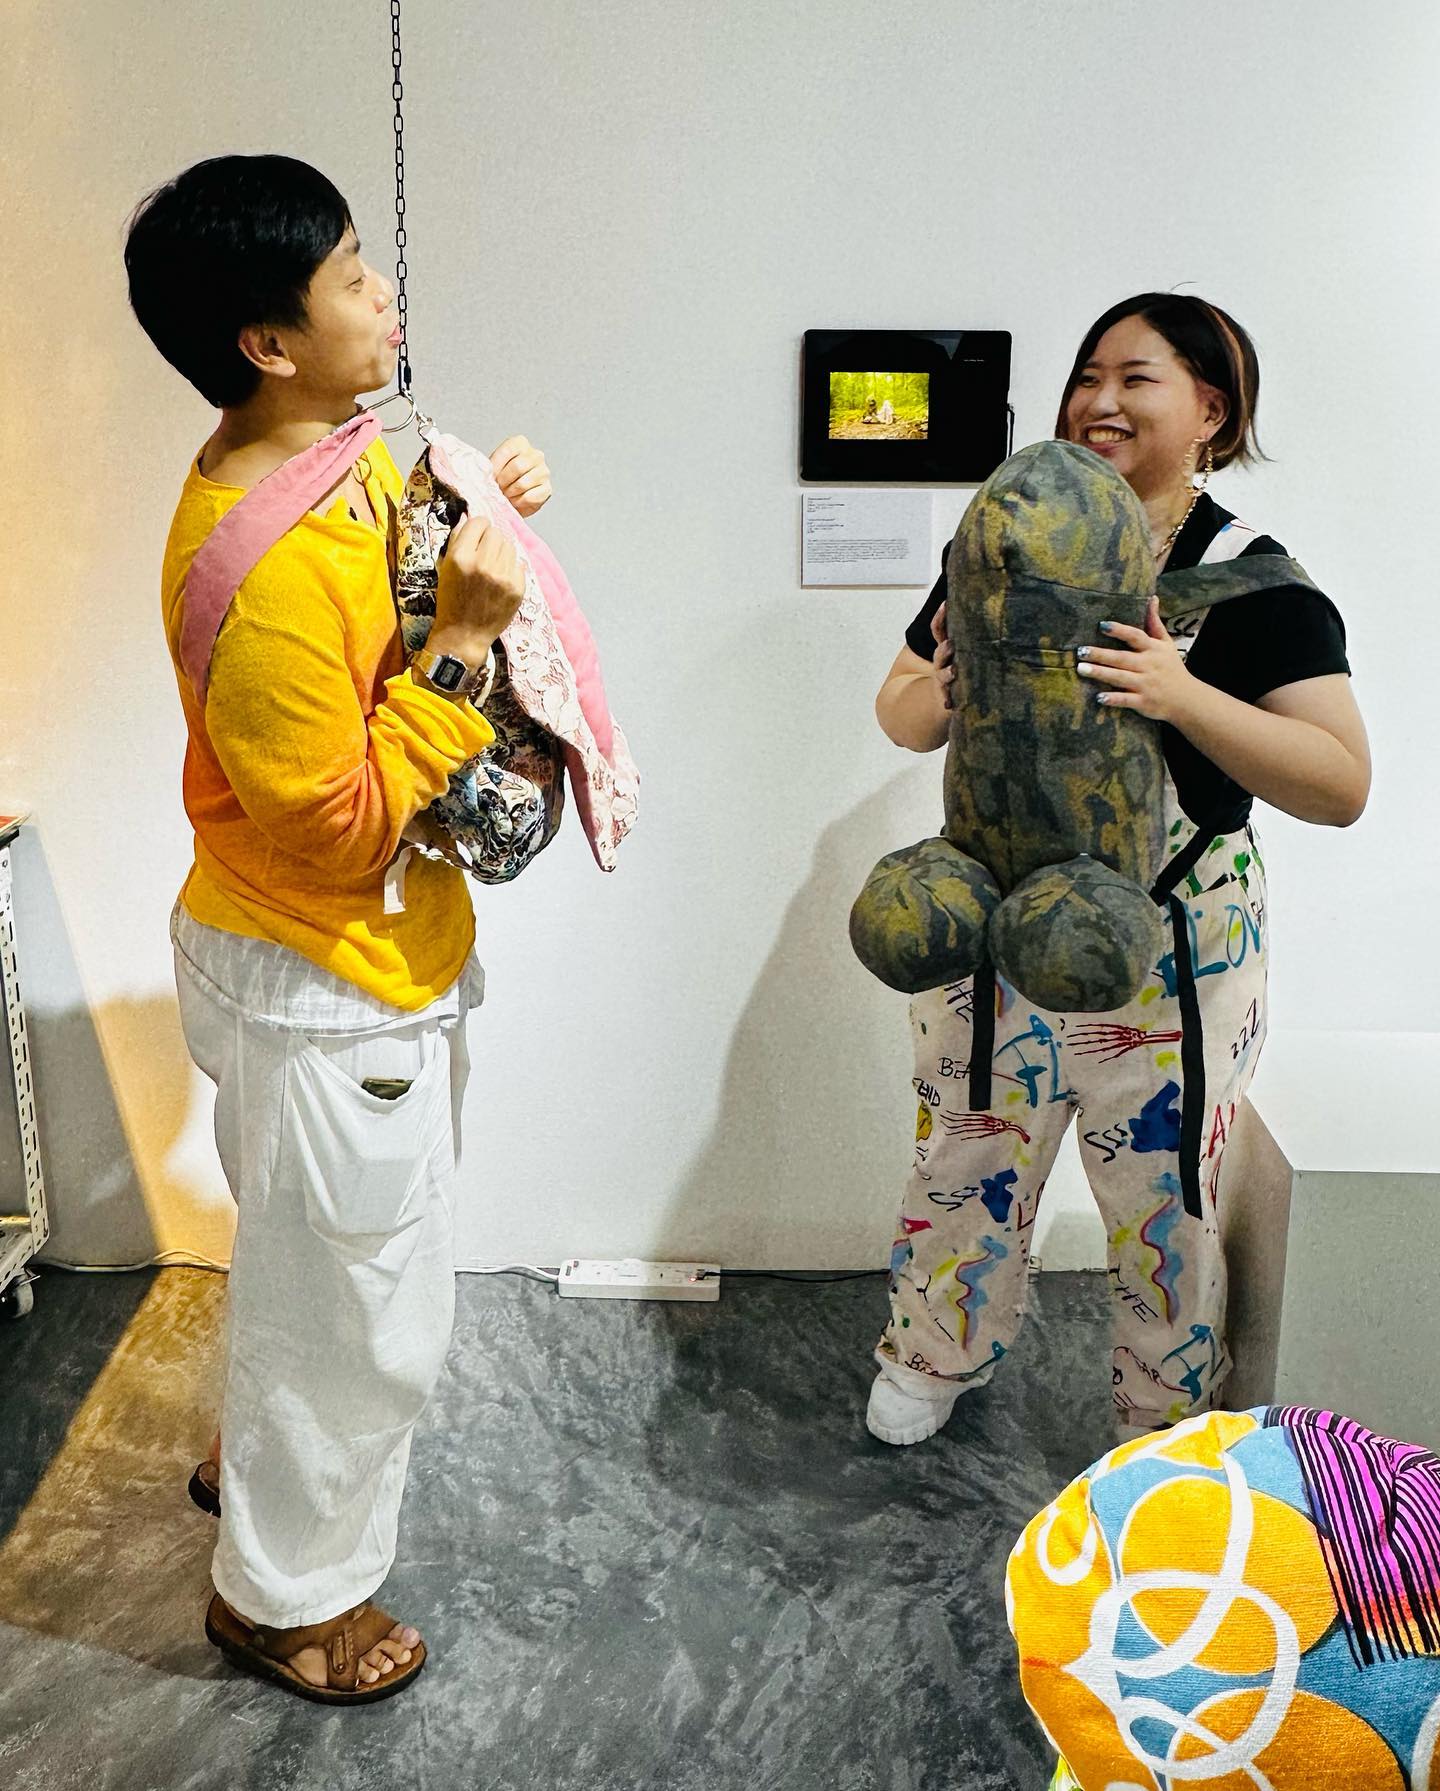 Chin-Chin Art Exhibition - vagina and penis backpack